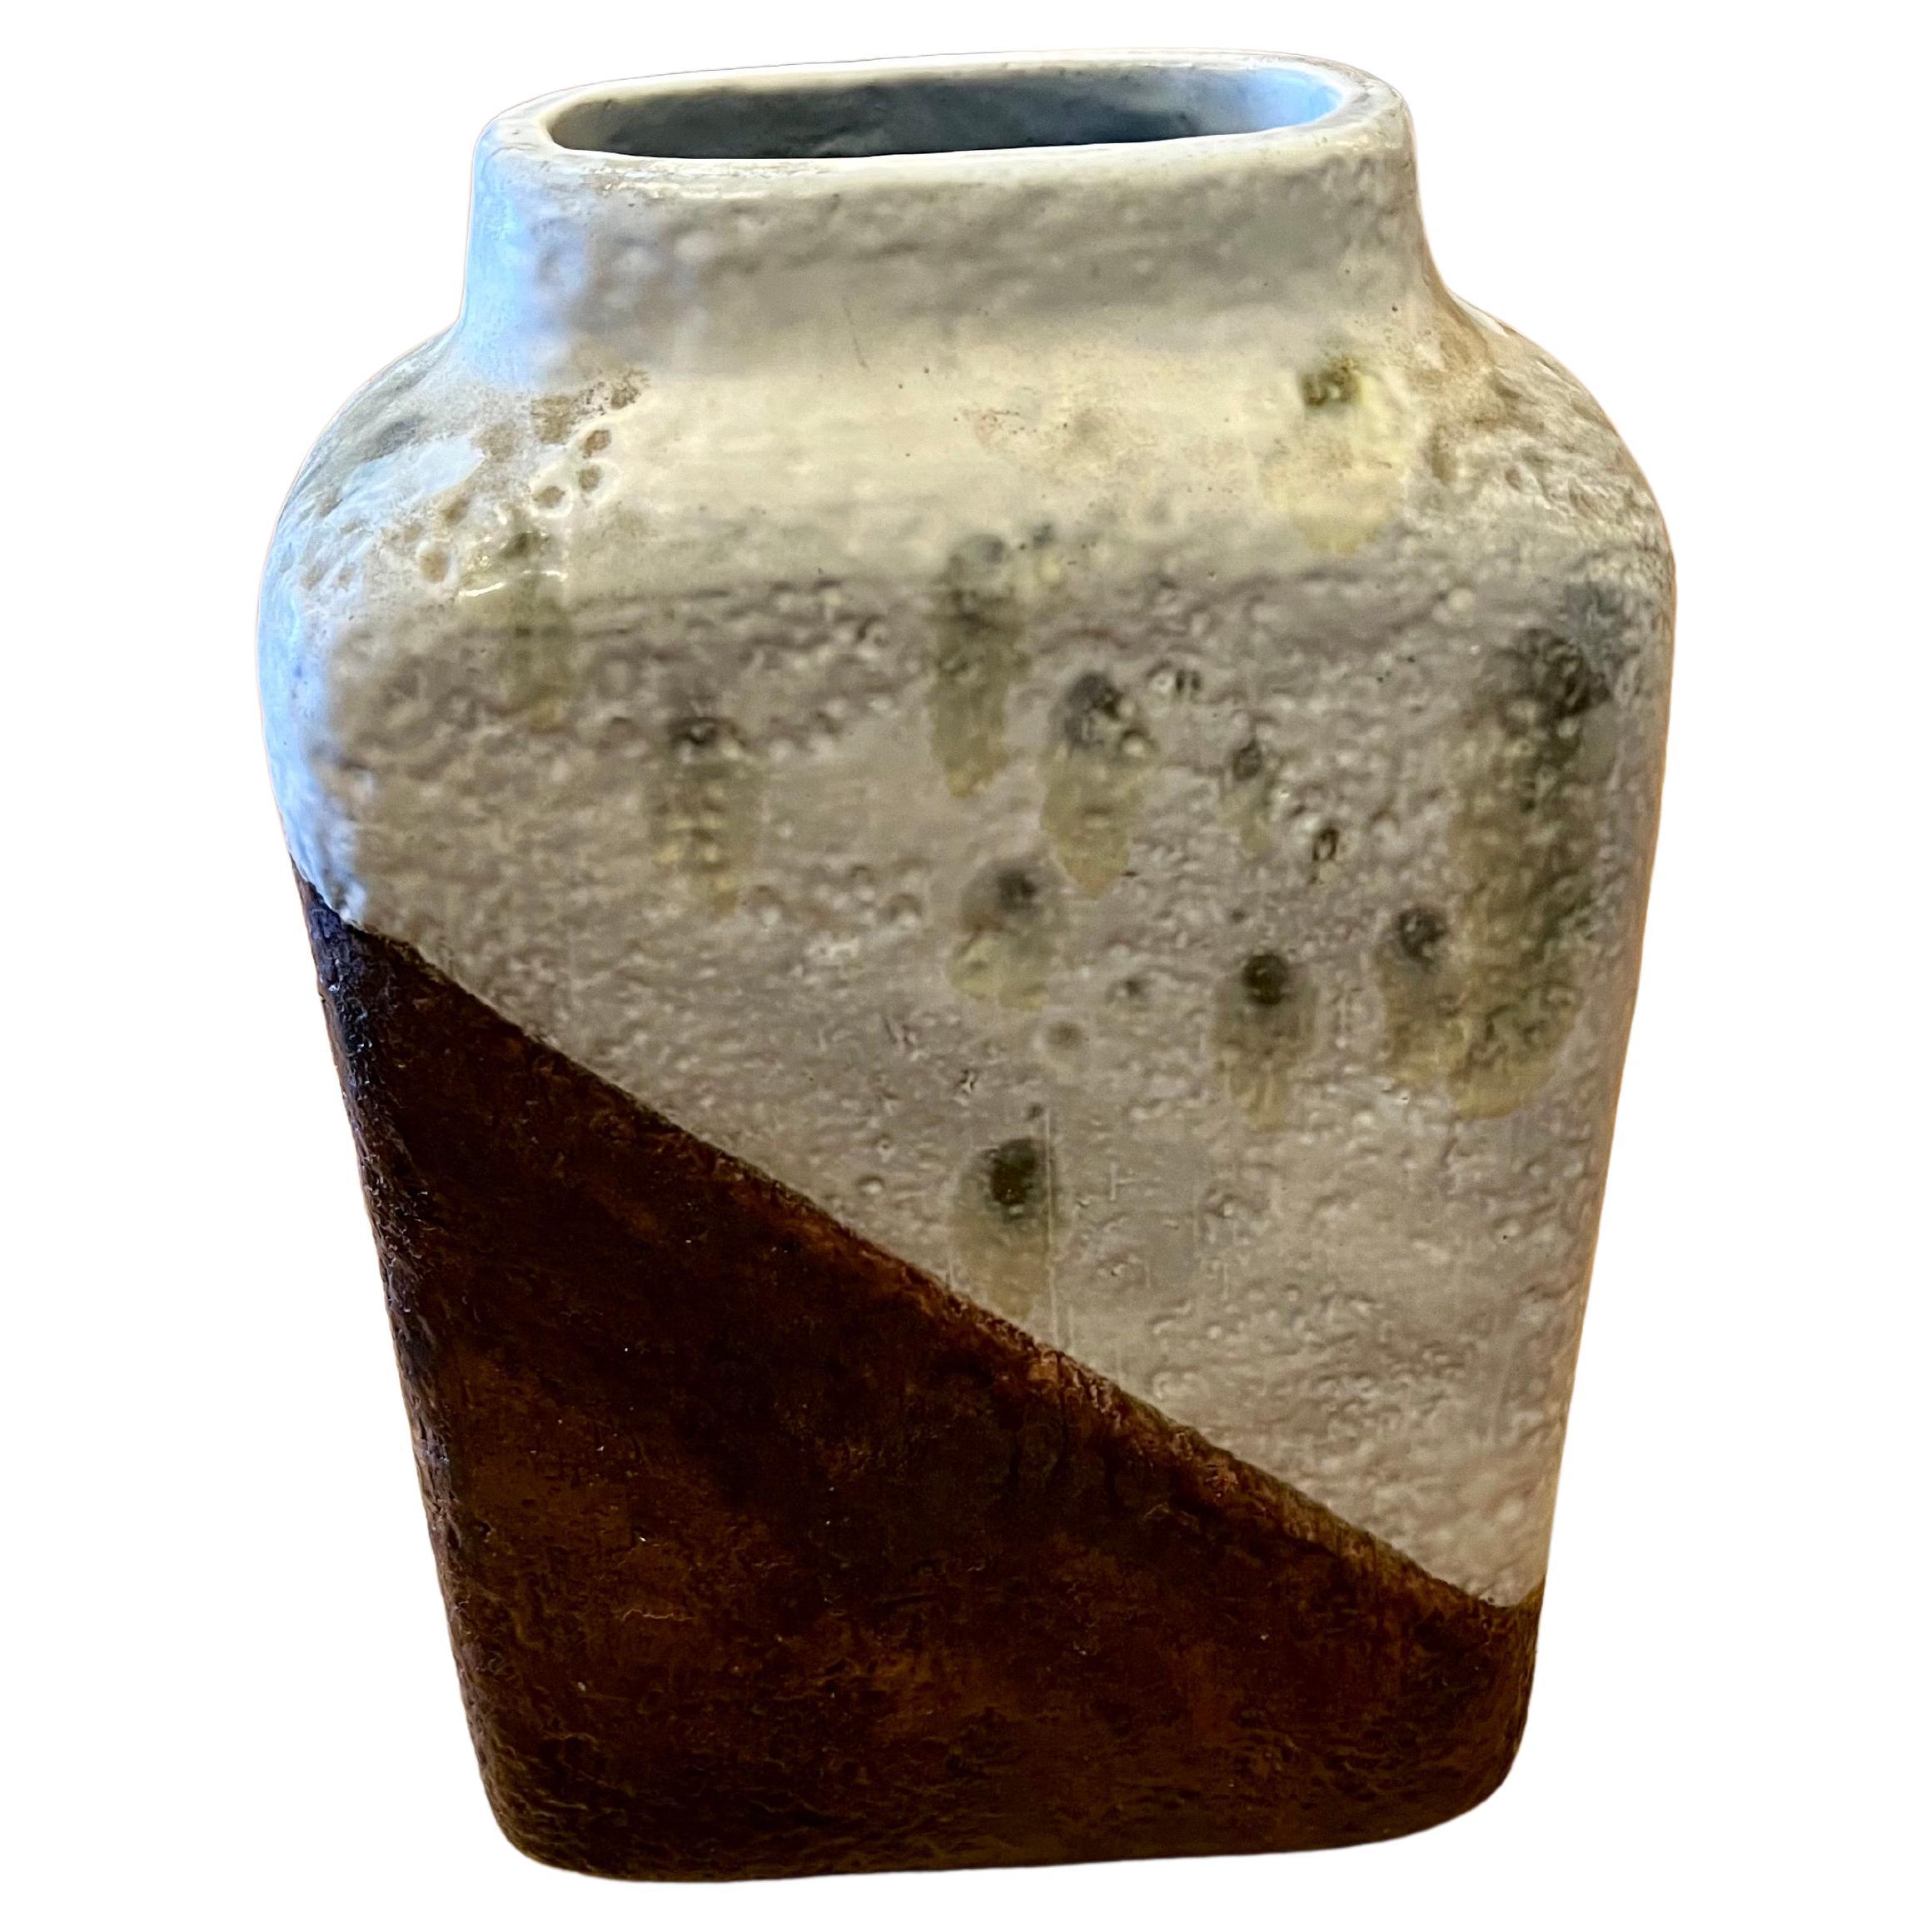 Marcello Fantoni Volcanic Glazed Large Rare Ceramic Vase 1955 Italy  In Excellent Condition For Sale In San Diego, CA